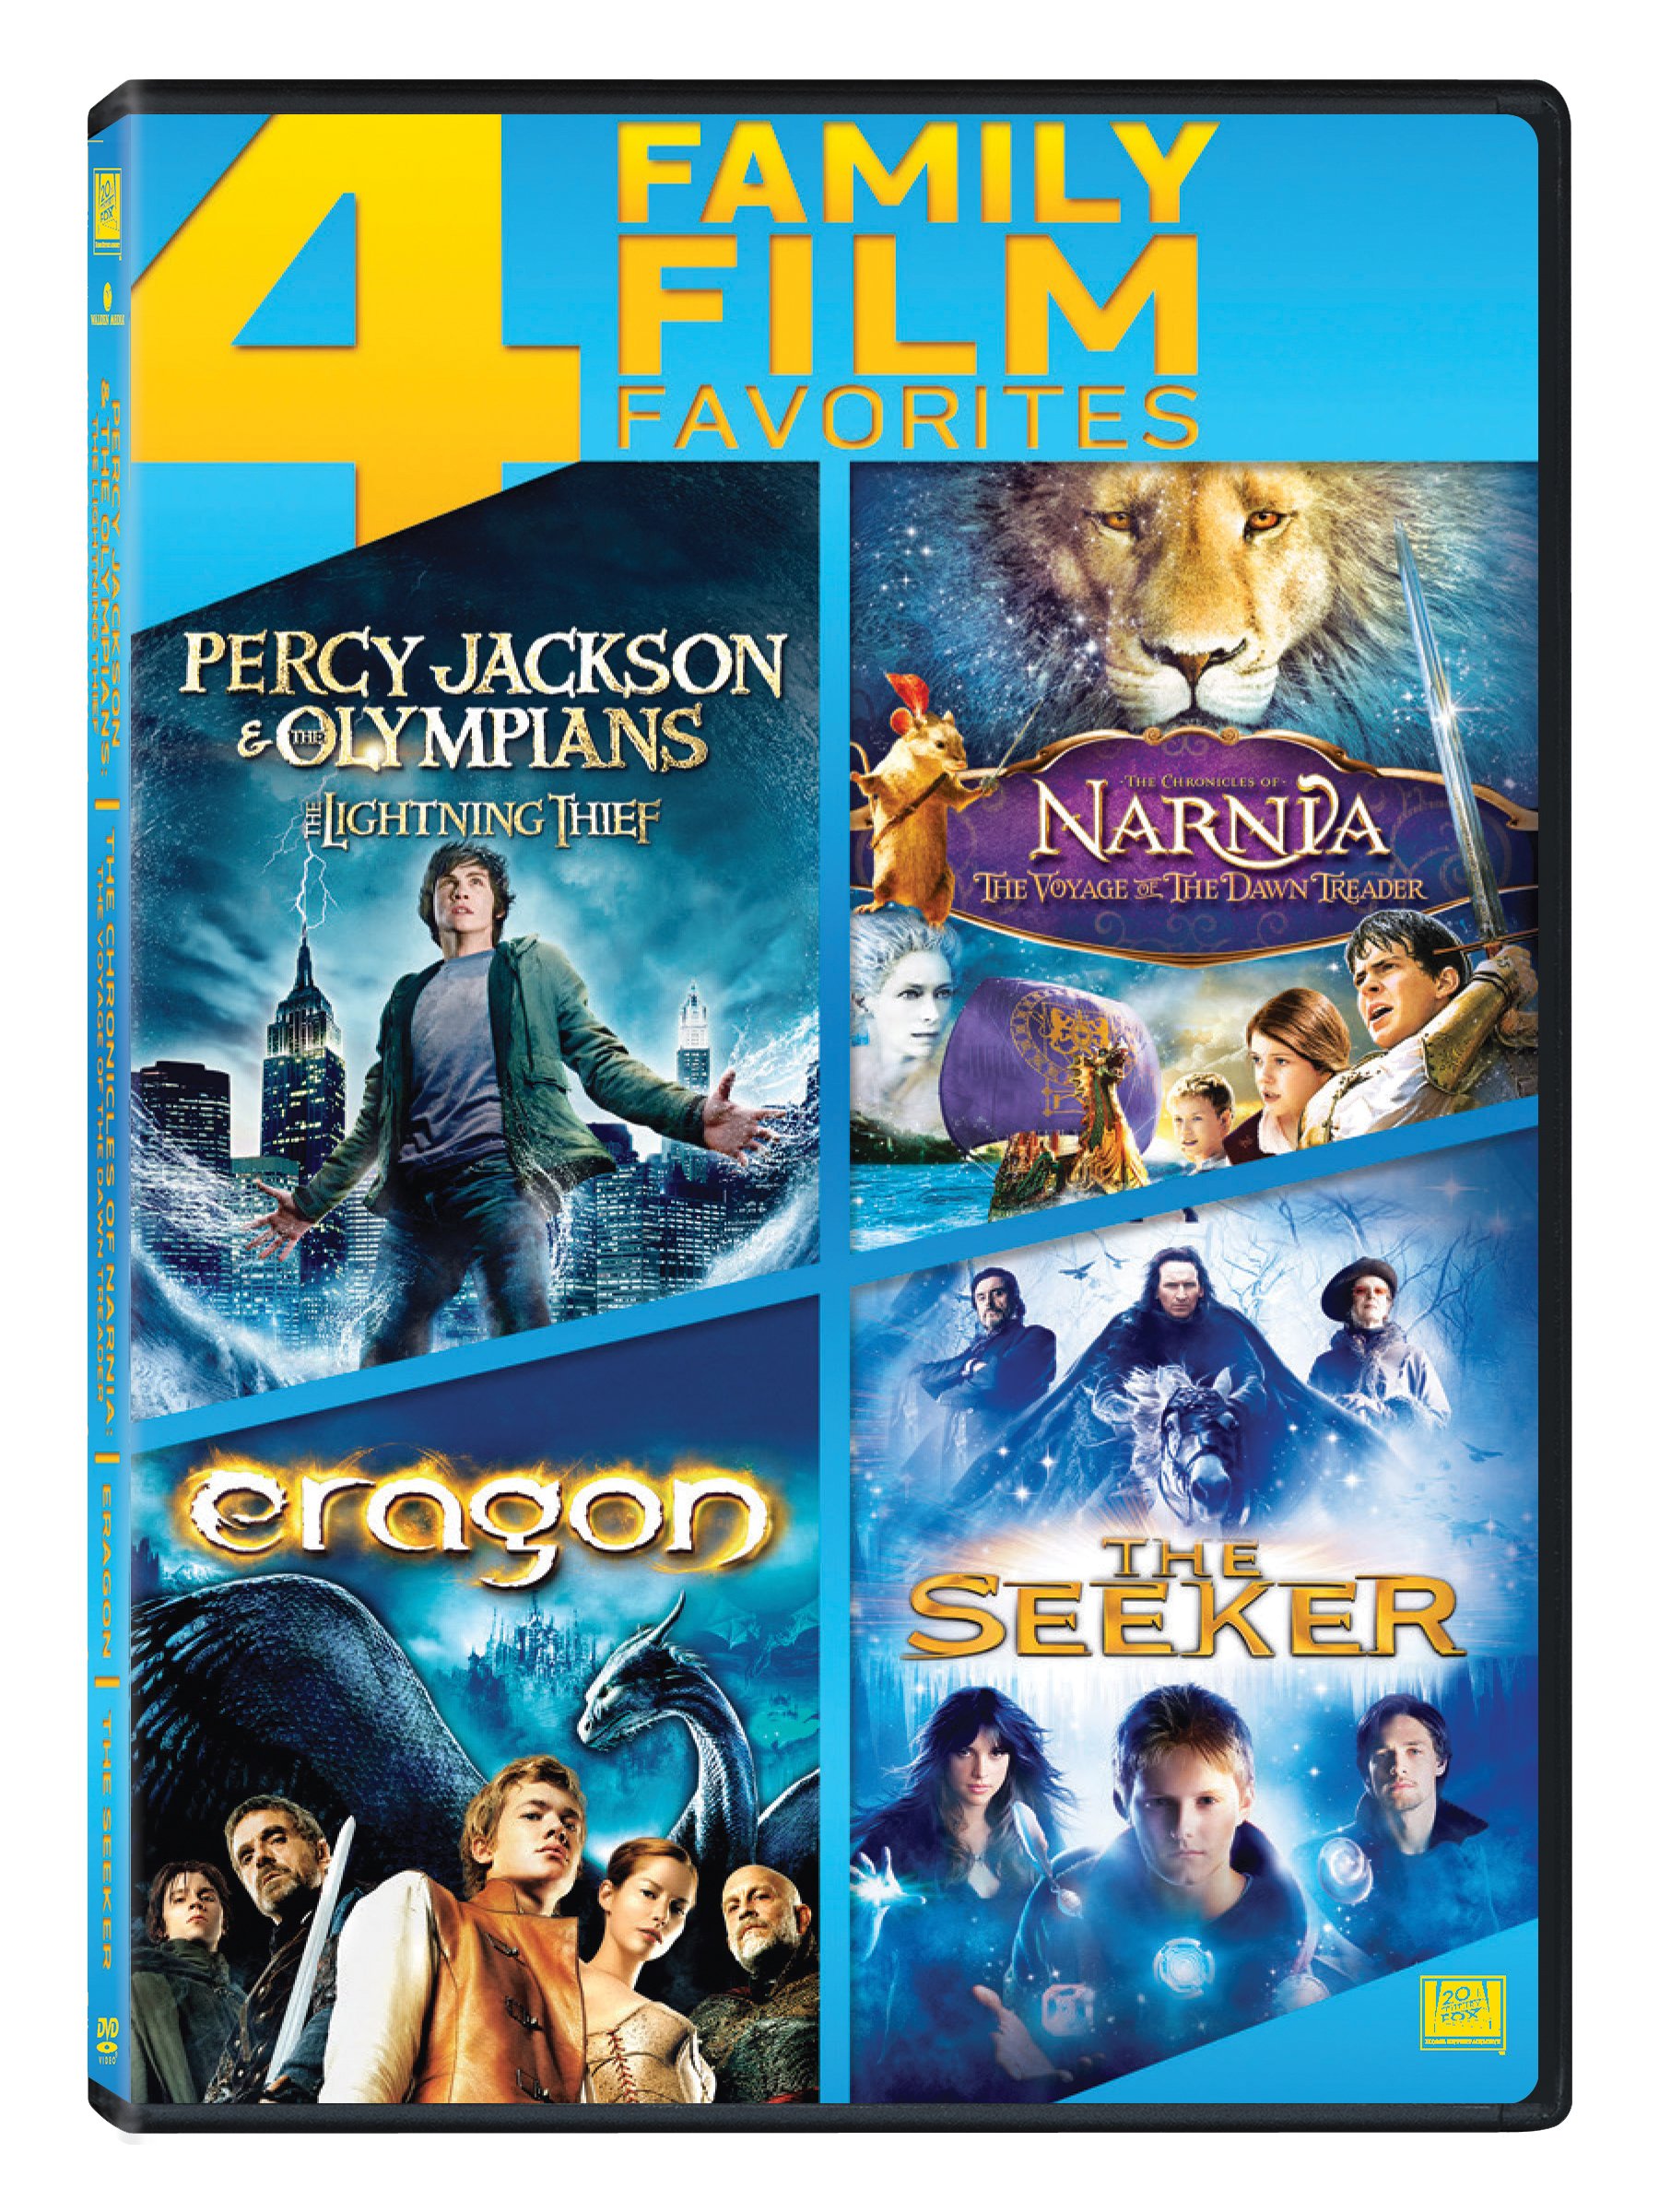 4-family-movies-collection-percy-jackson-the-olympians-the-lightning-thief-narnia-the-voyage-of-the-dawn-treader-eragon-the-seeker